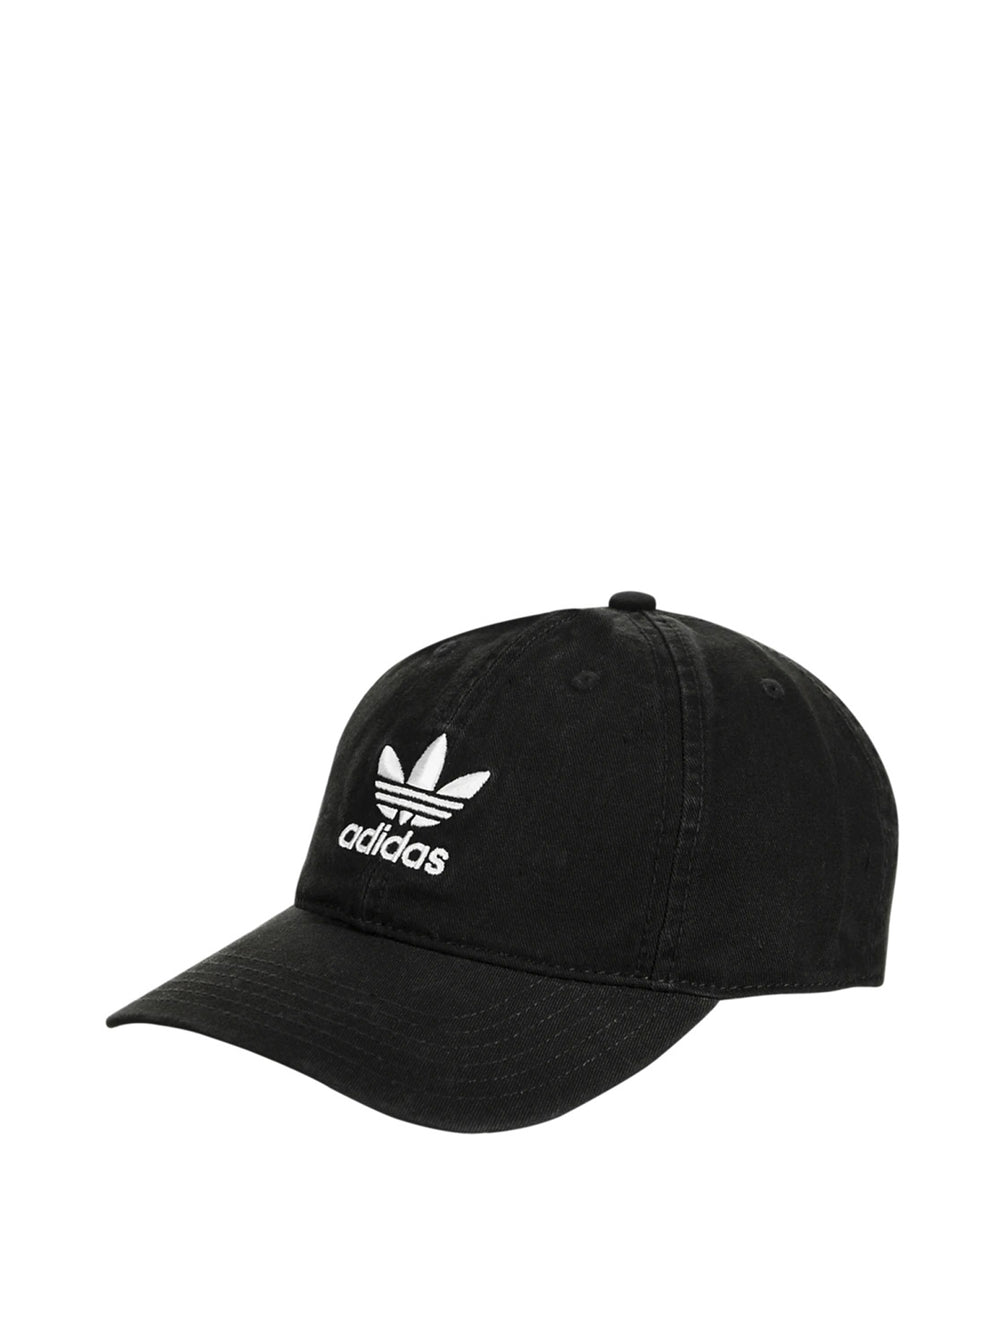 ADIDAS ORIGINAL RELAXED STRAPBACK HAT  - CLEARANCE